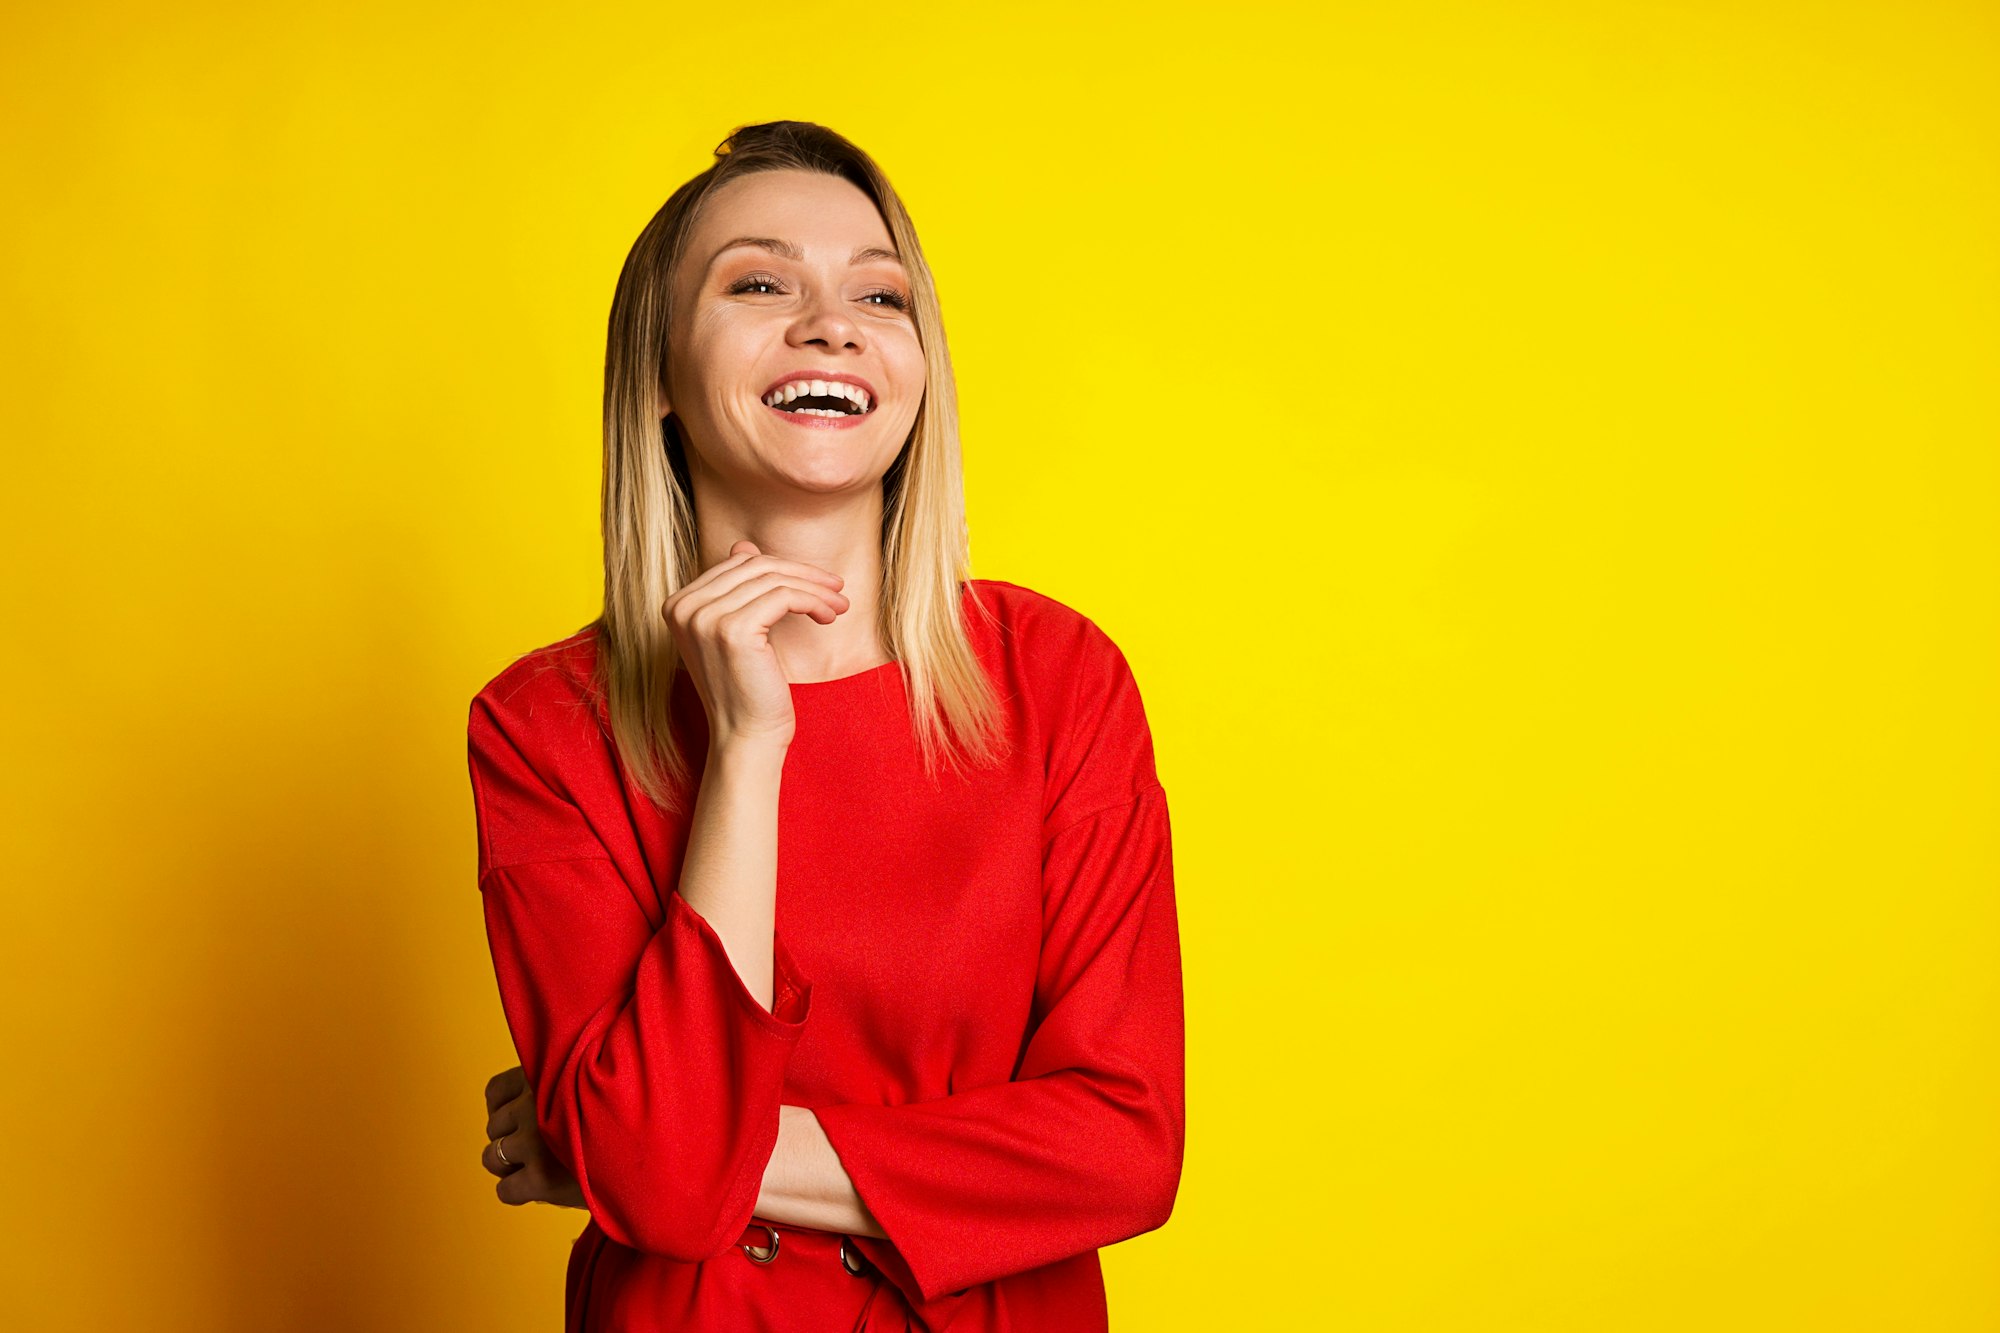 Laughing, happy young girl in a red dress on a yellow background. Space for text, emotional portrait